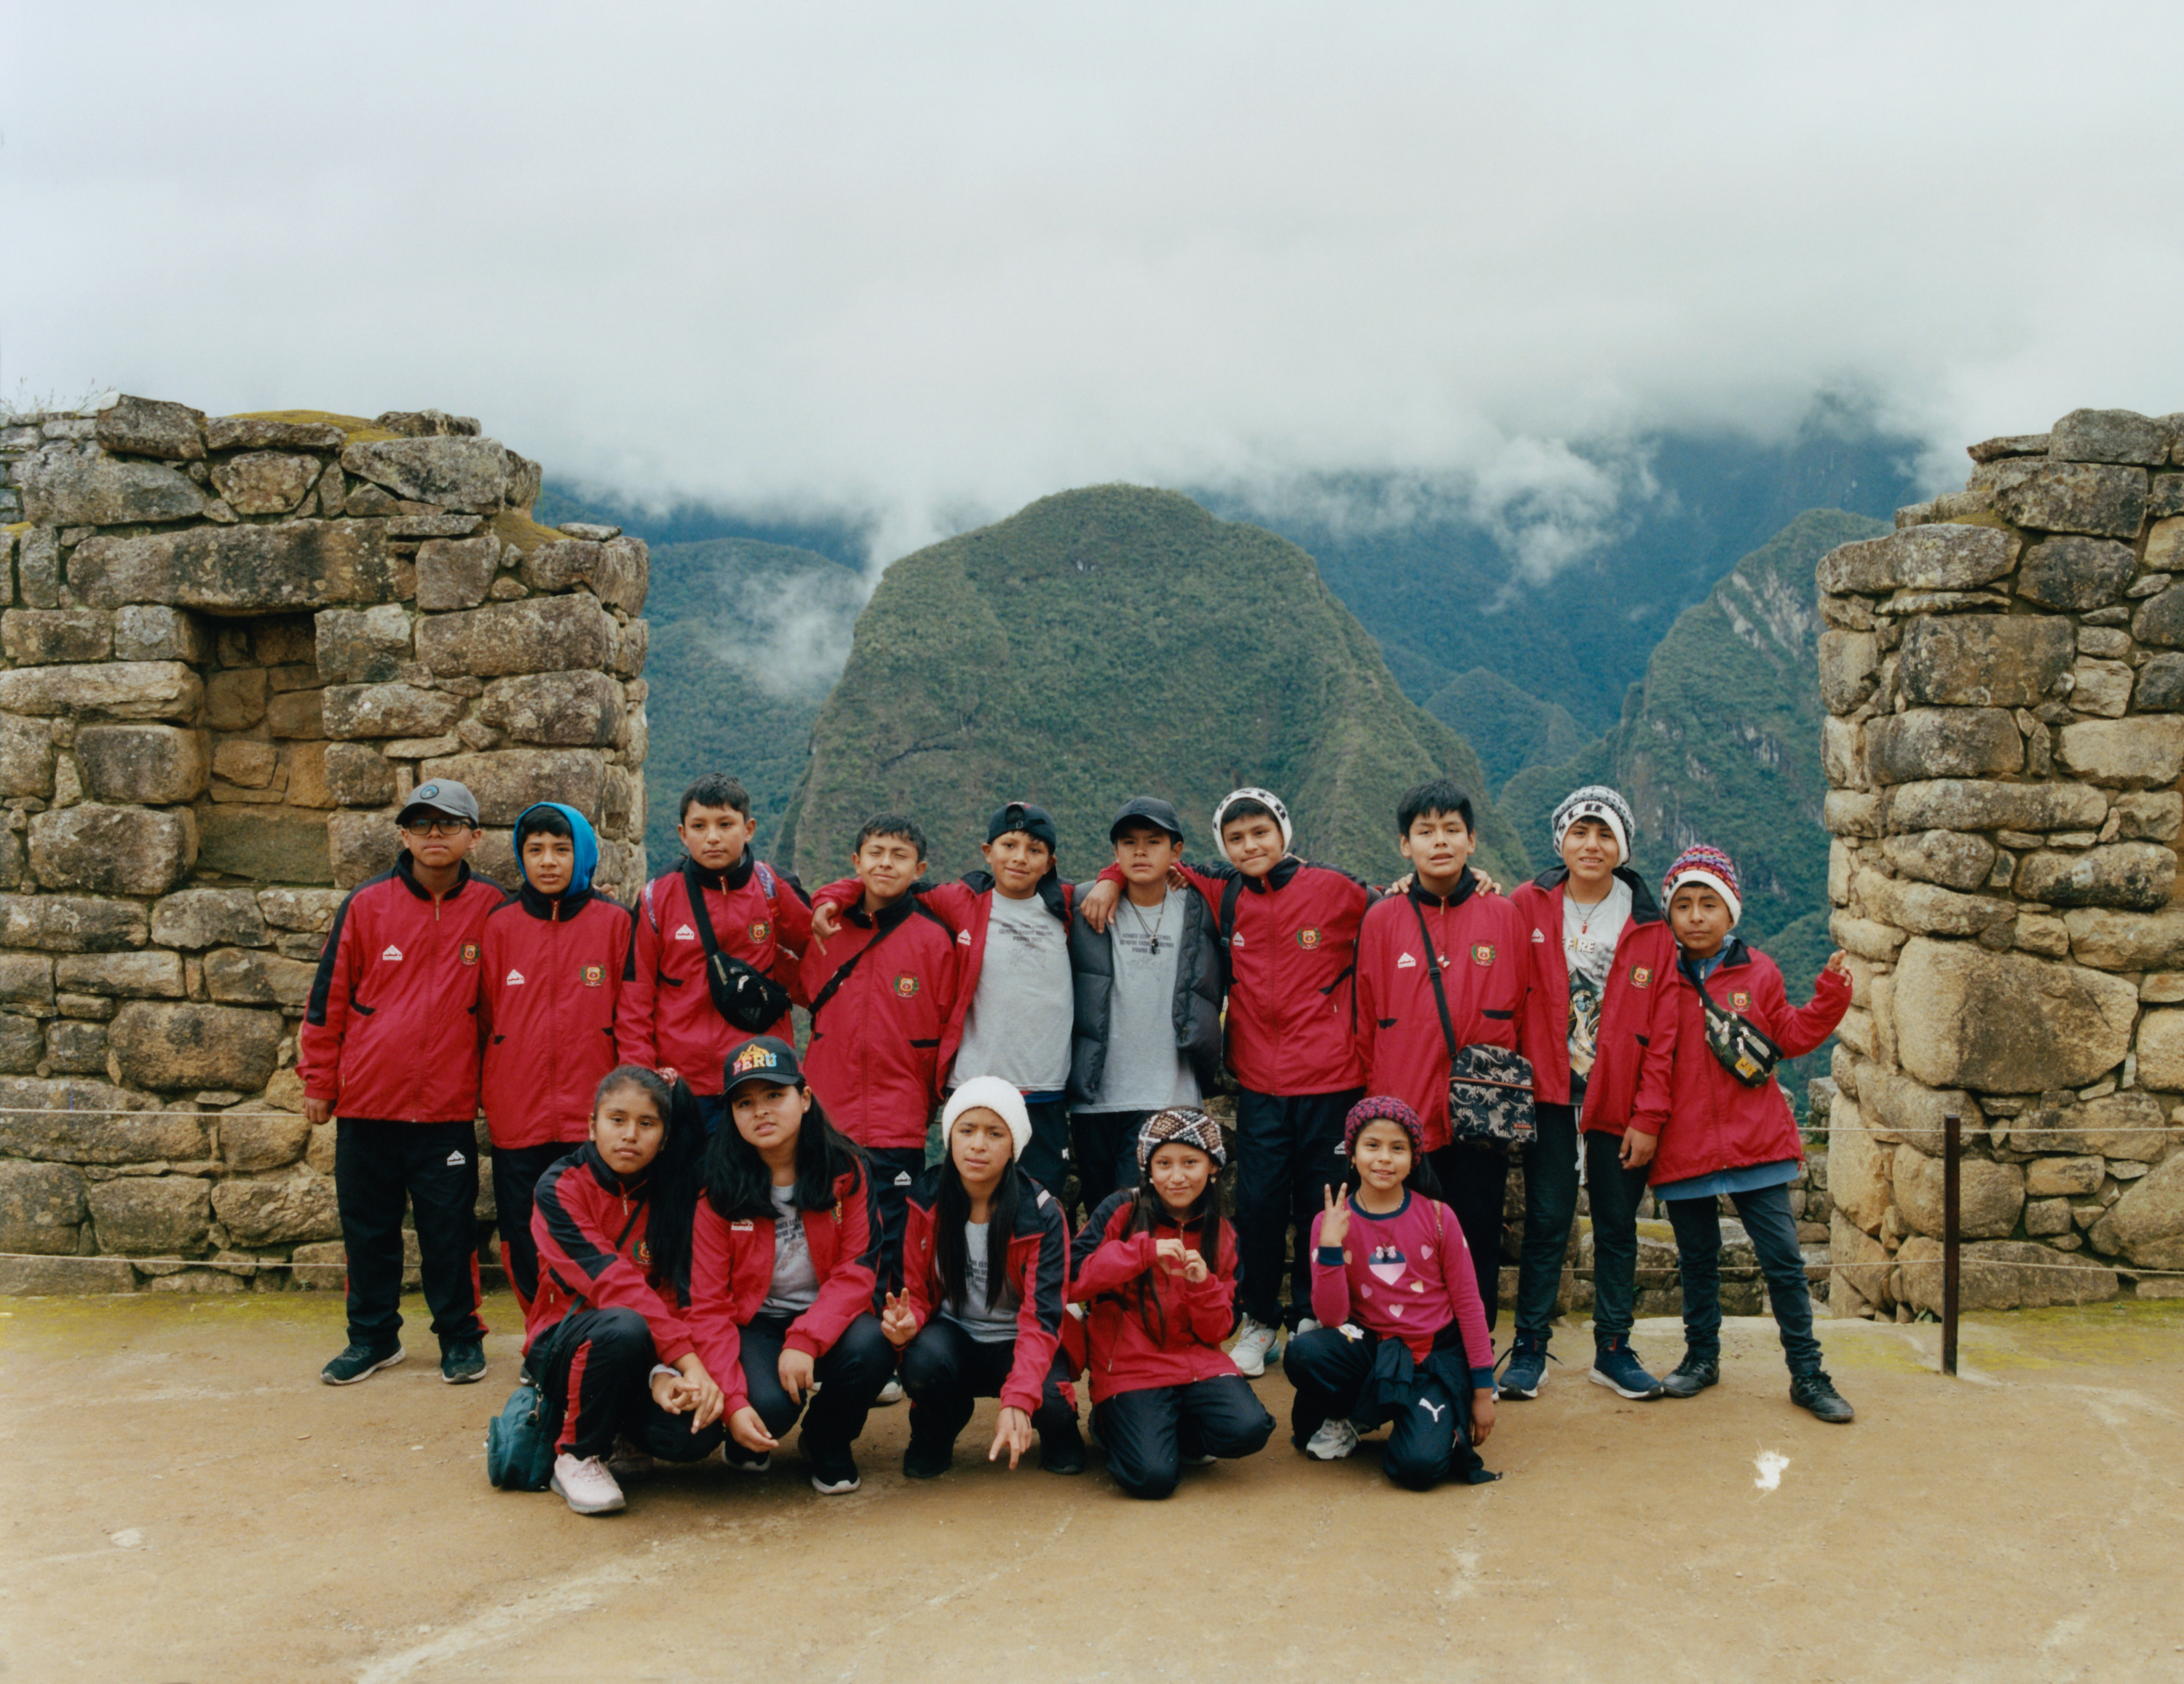 School Children from the North of Peru visiting Machu Picchu. Photography Lea Winkler